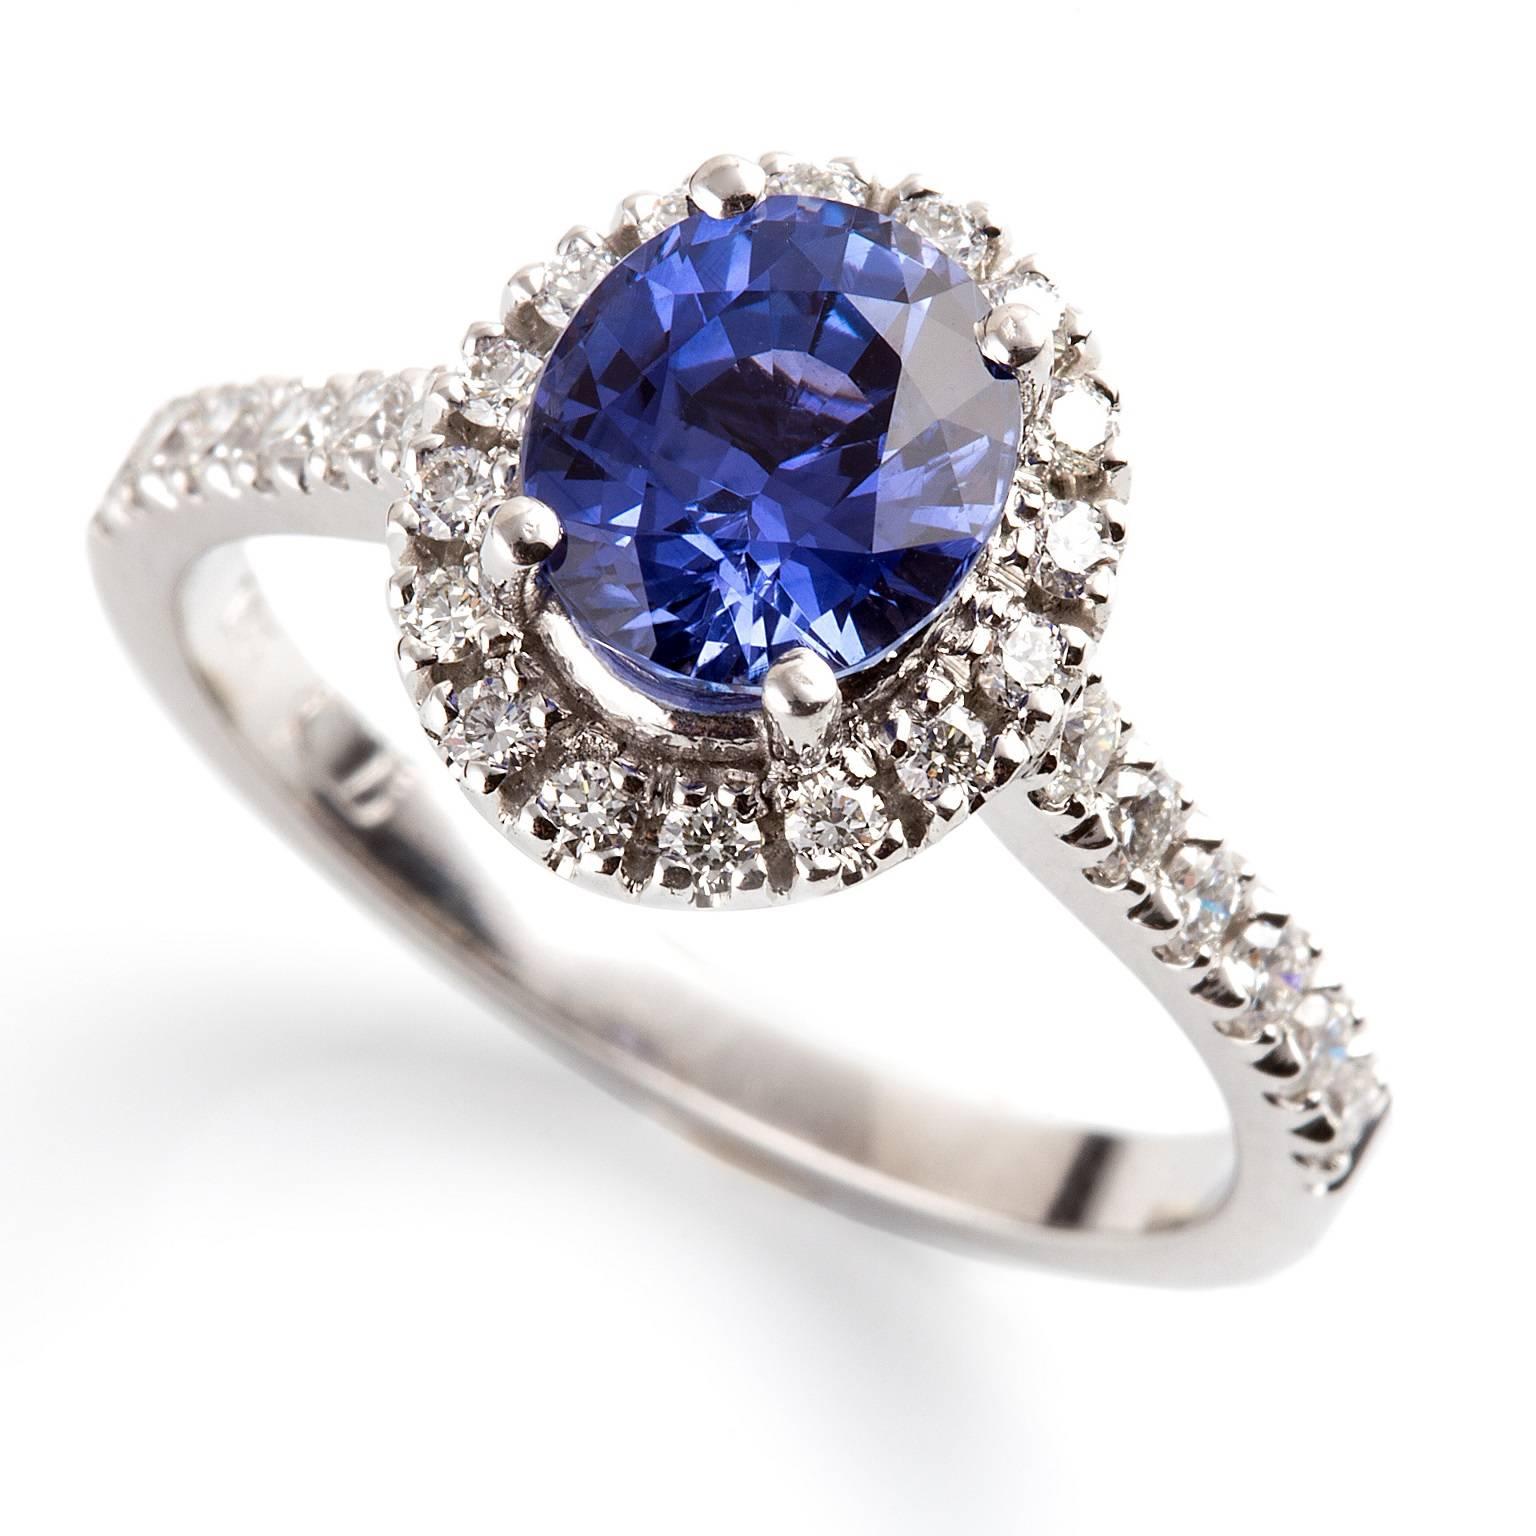 Blu Zaffiro Halo Ring

Set with the finest blue Ceylon sapphire and surround by a halo of diamonds and diamonds extending into the band, this ring is absolutely beautiful.

Oval faceted sapphire: finest medium blue colour, natural, untreated,